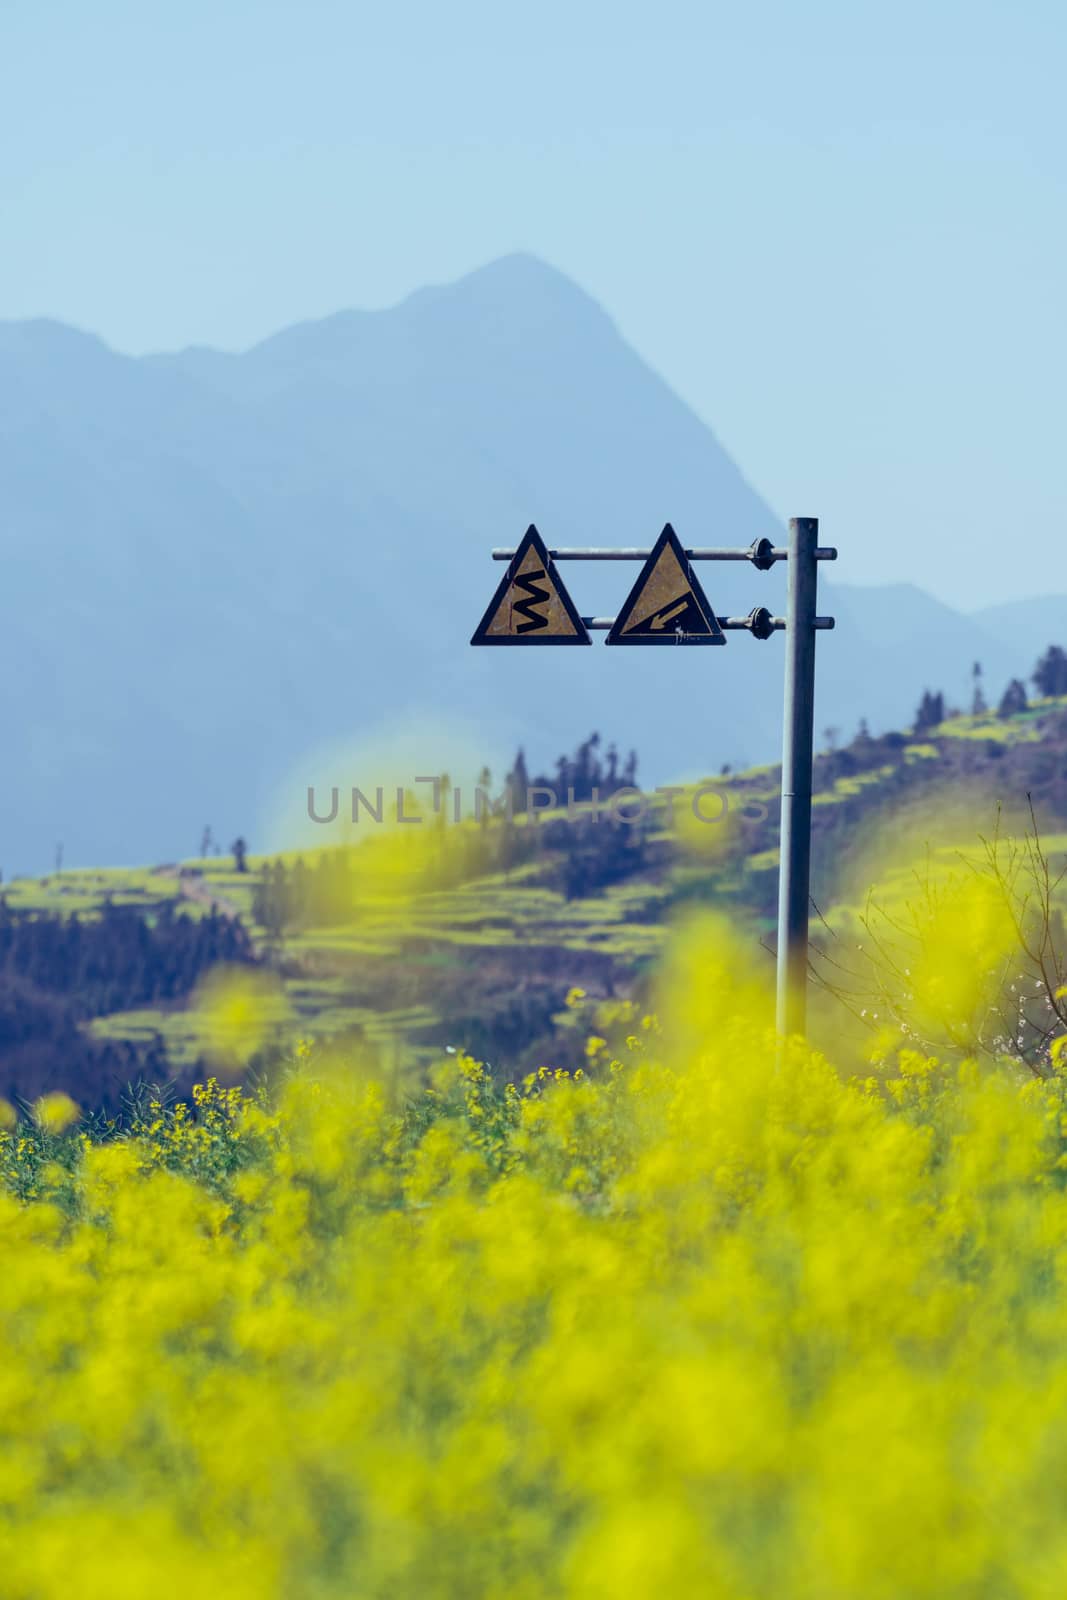 Road signs with Rapeseed flowers at Snail farm Luositian Field in Luoping County, China